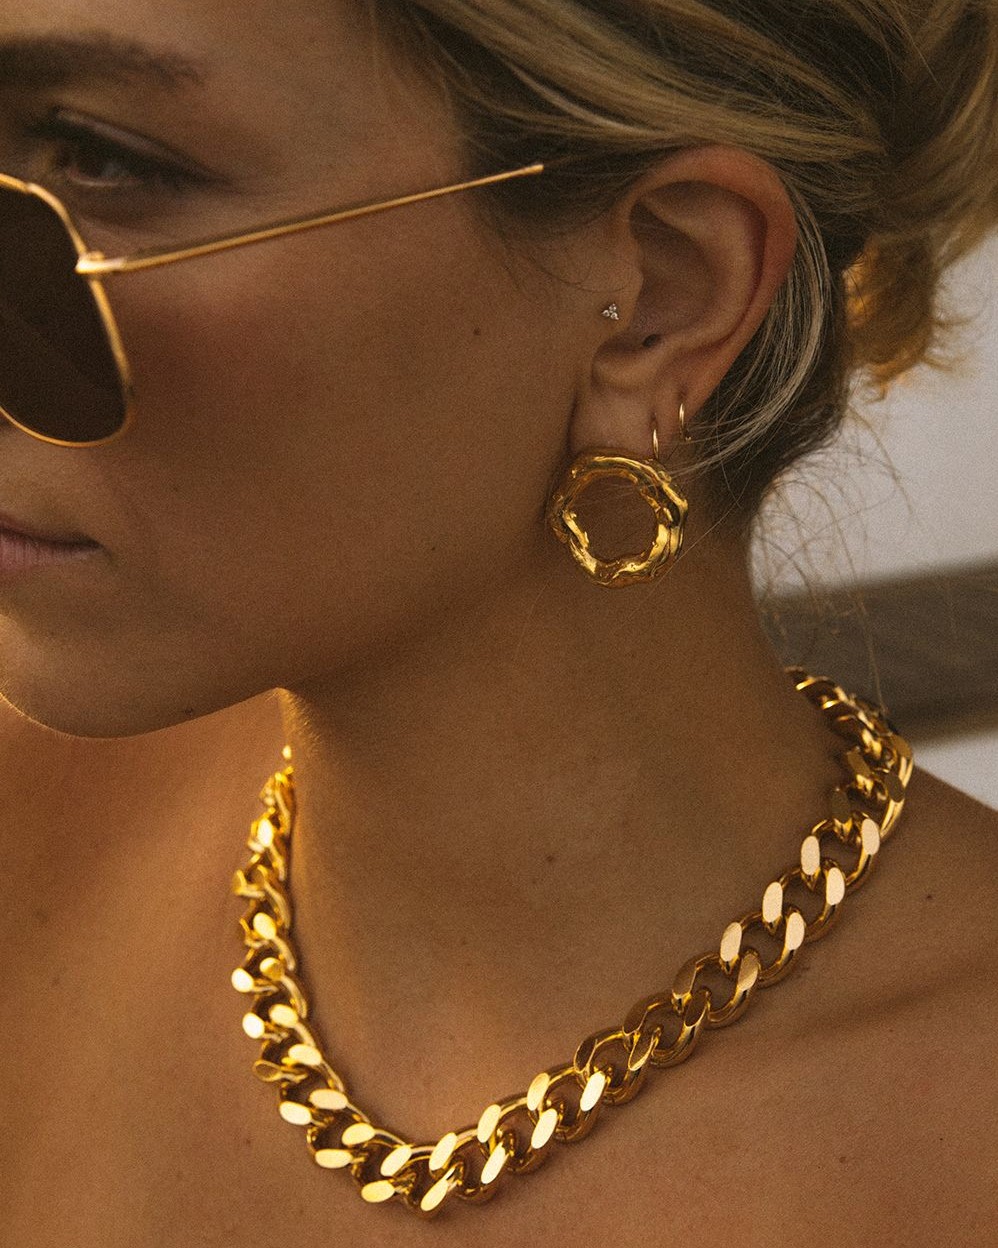 Aureum Collective - Vintage inspired luxury jewelry to elevate the everyday-min